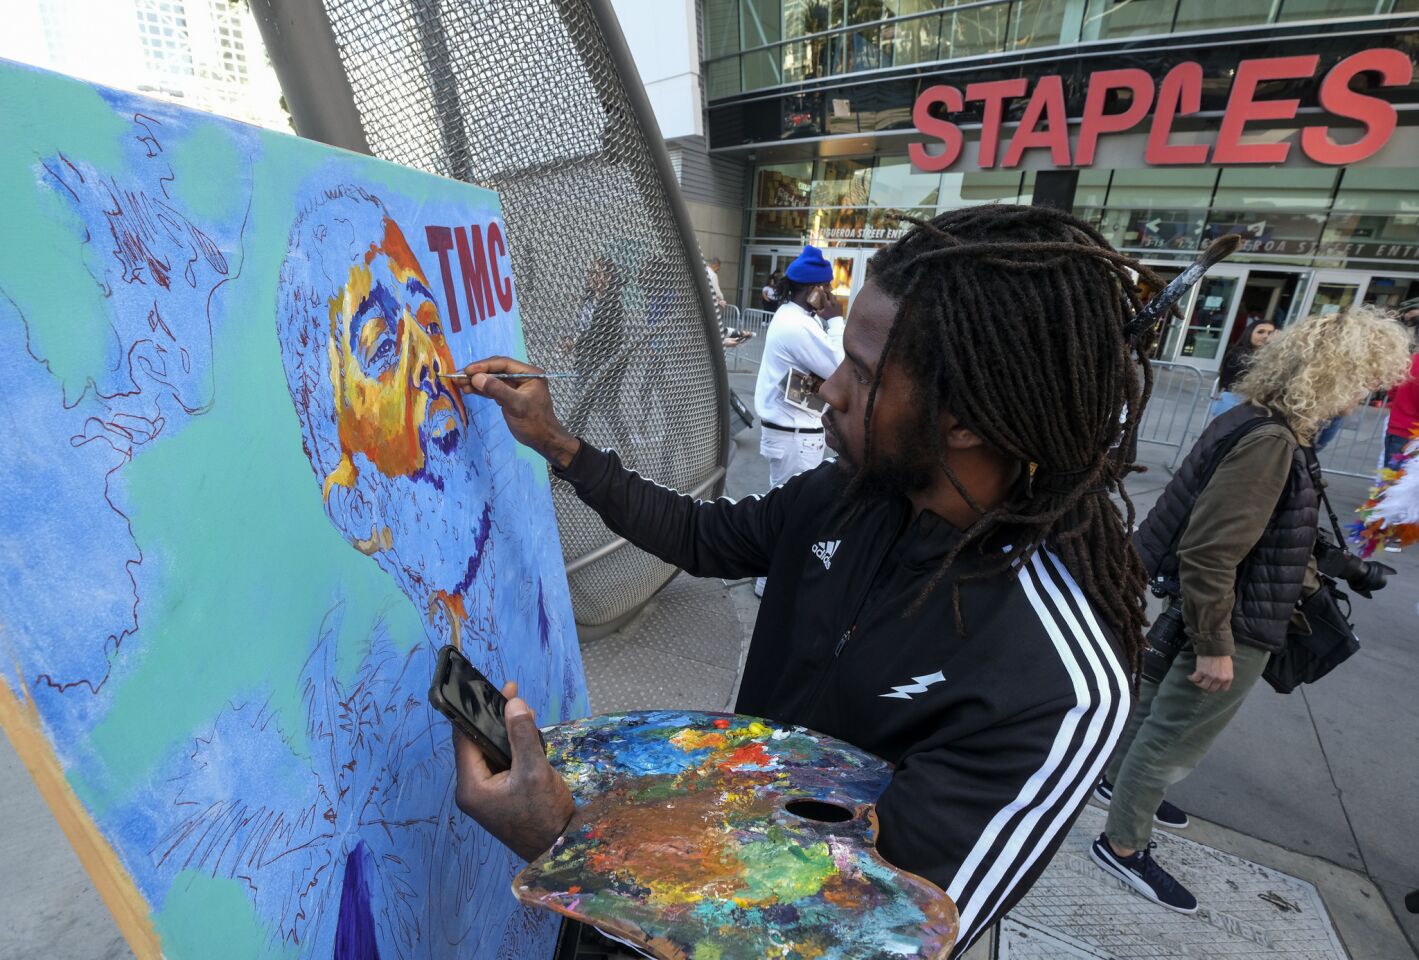 Artist Gift Davis works on a portrait of rapper Nipsey Hussle as fans wait in line to attend a public memorial at Staples Center.